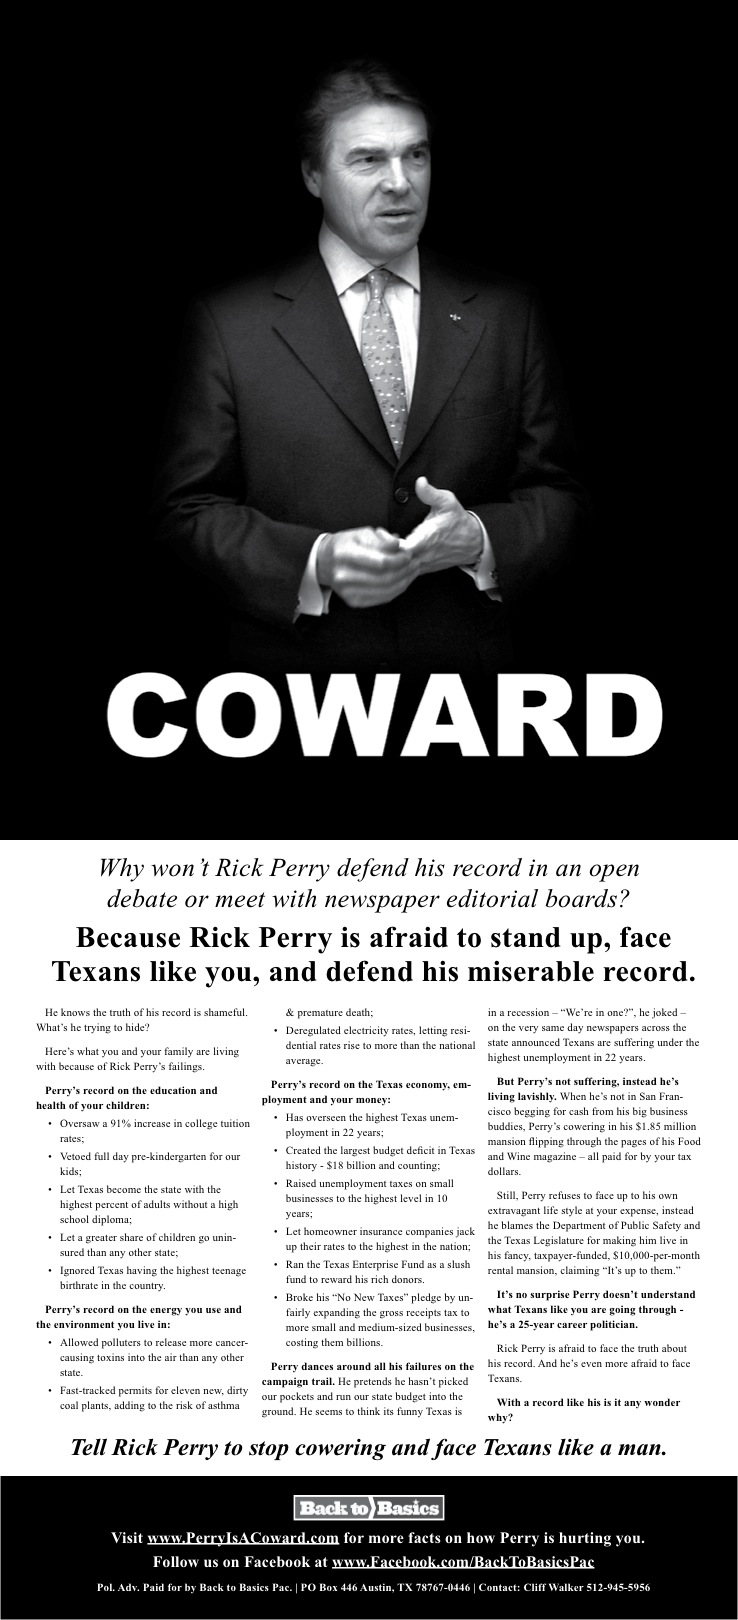 New Ad Targets Governor Perry – Calls Him A “Coward” «